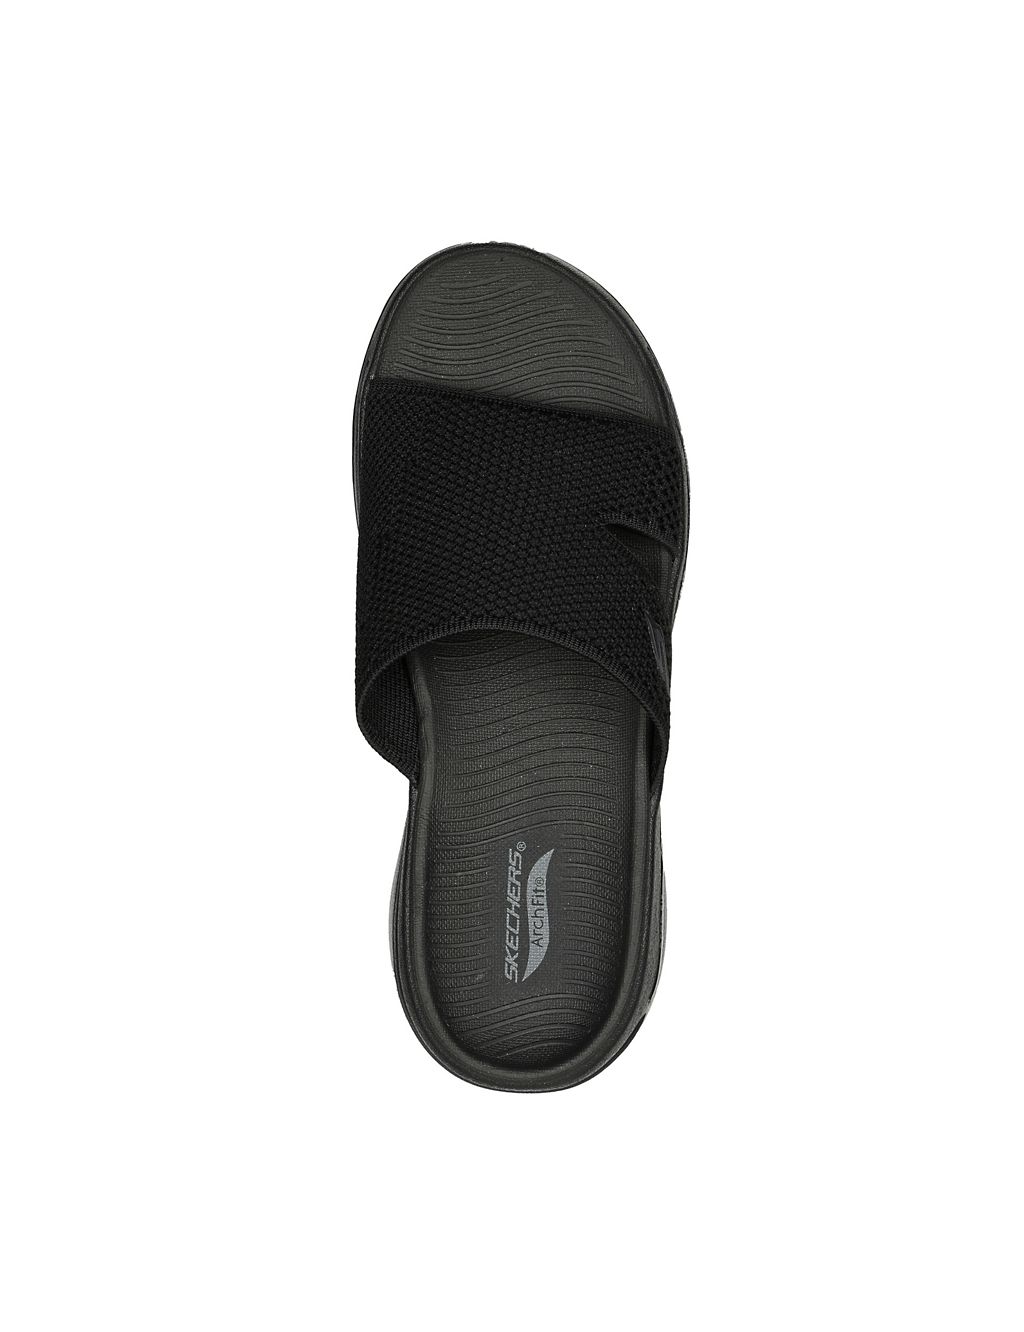 GO WALK™ Arch Fit Flat Sandals 4 of 5